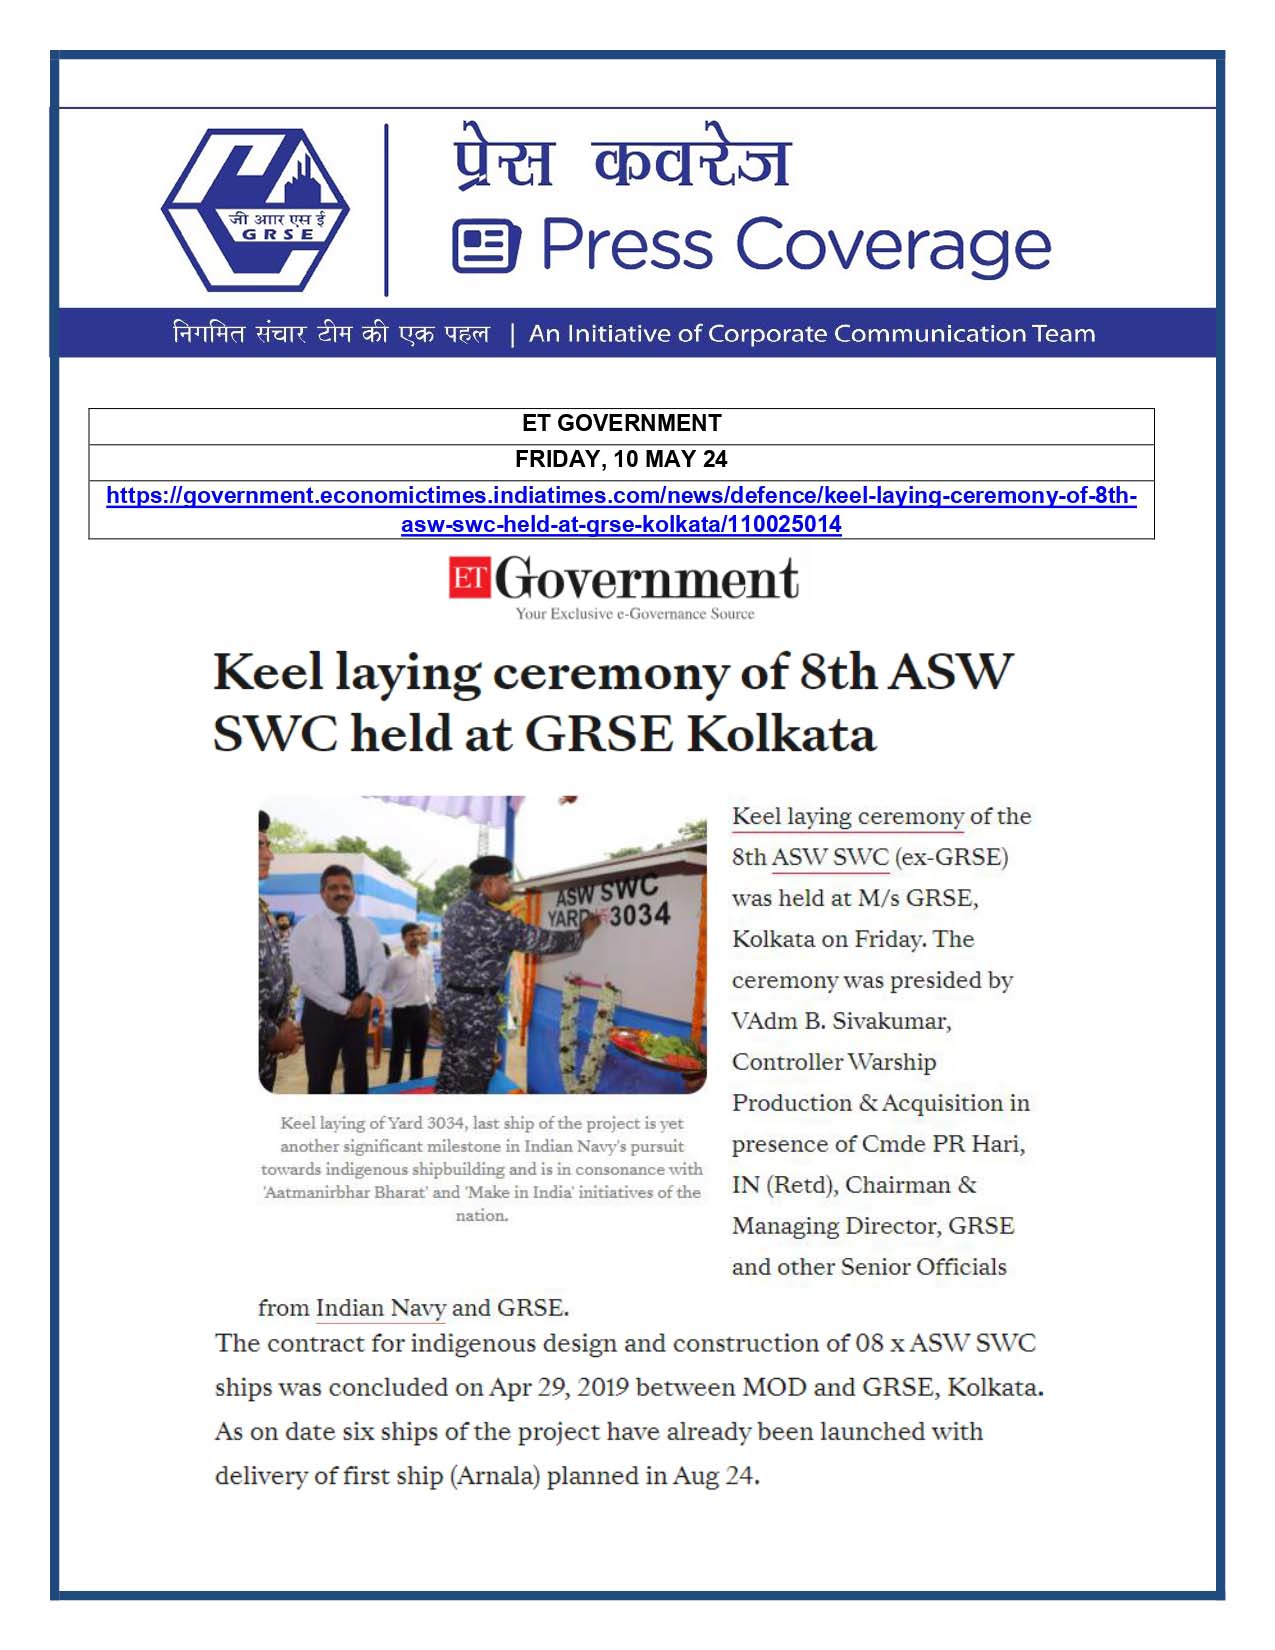 Press Coverage : ET Government, 10 May 24 : Keel Laying Ceremony of 8th ASW SWC held at GRSE Kolkata